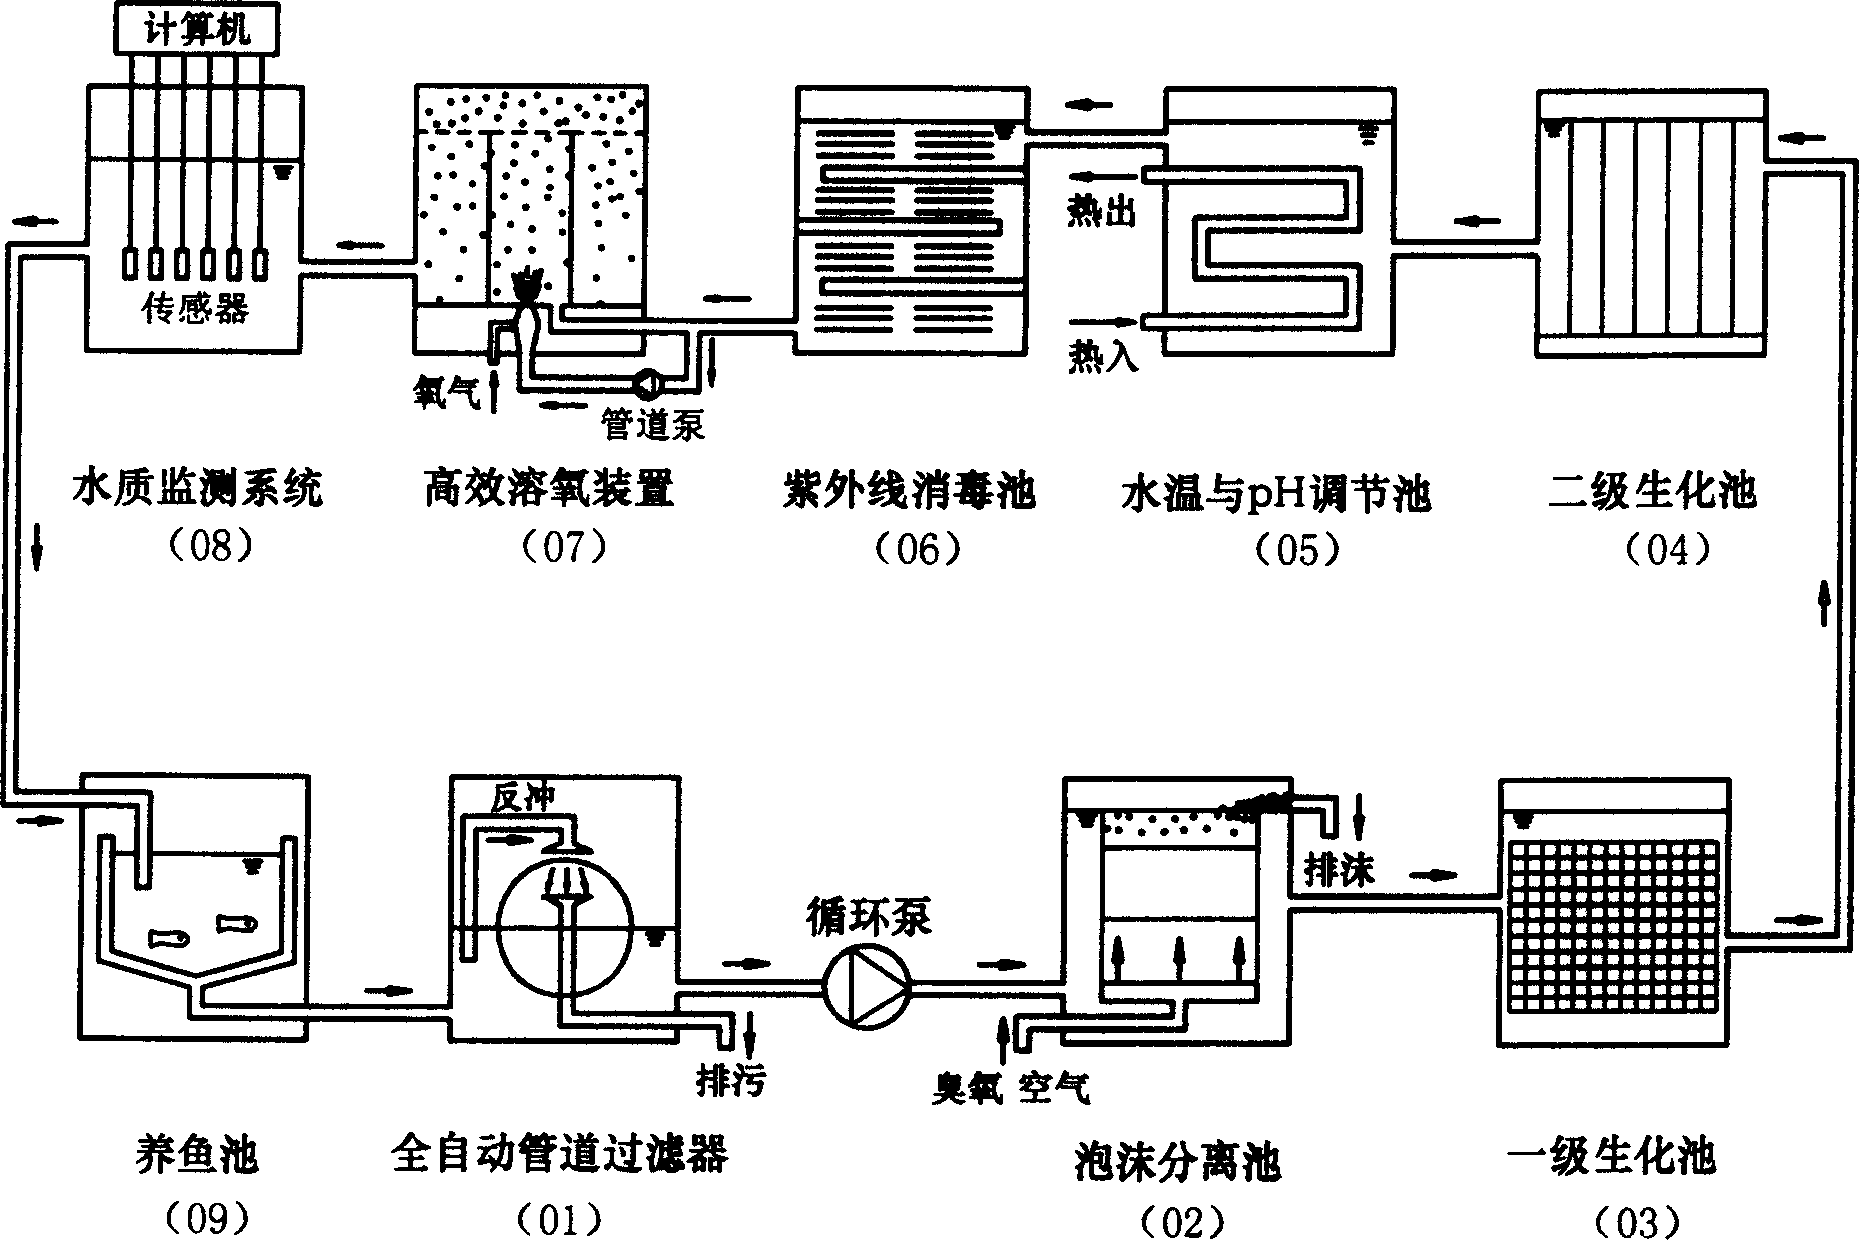 Water treatment method of circulating water fish culture in factory style